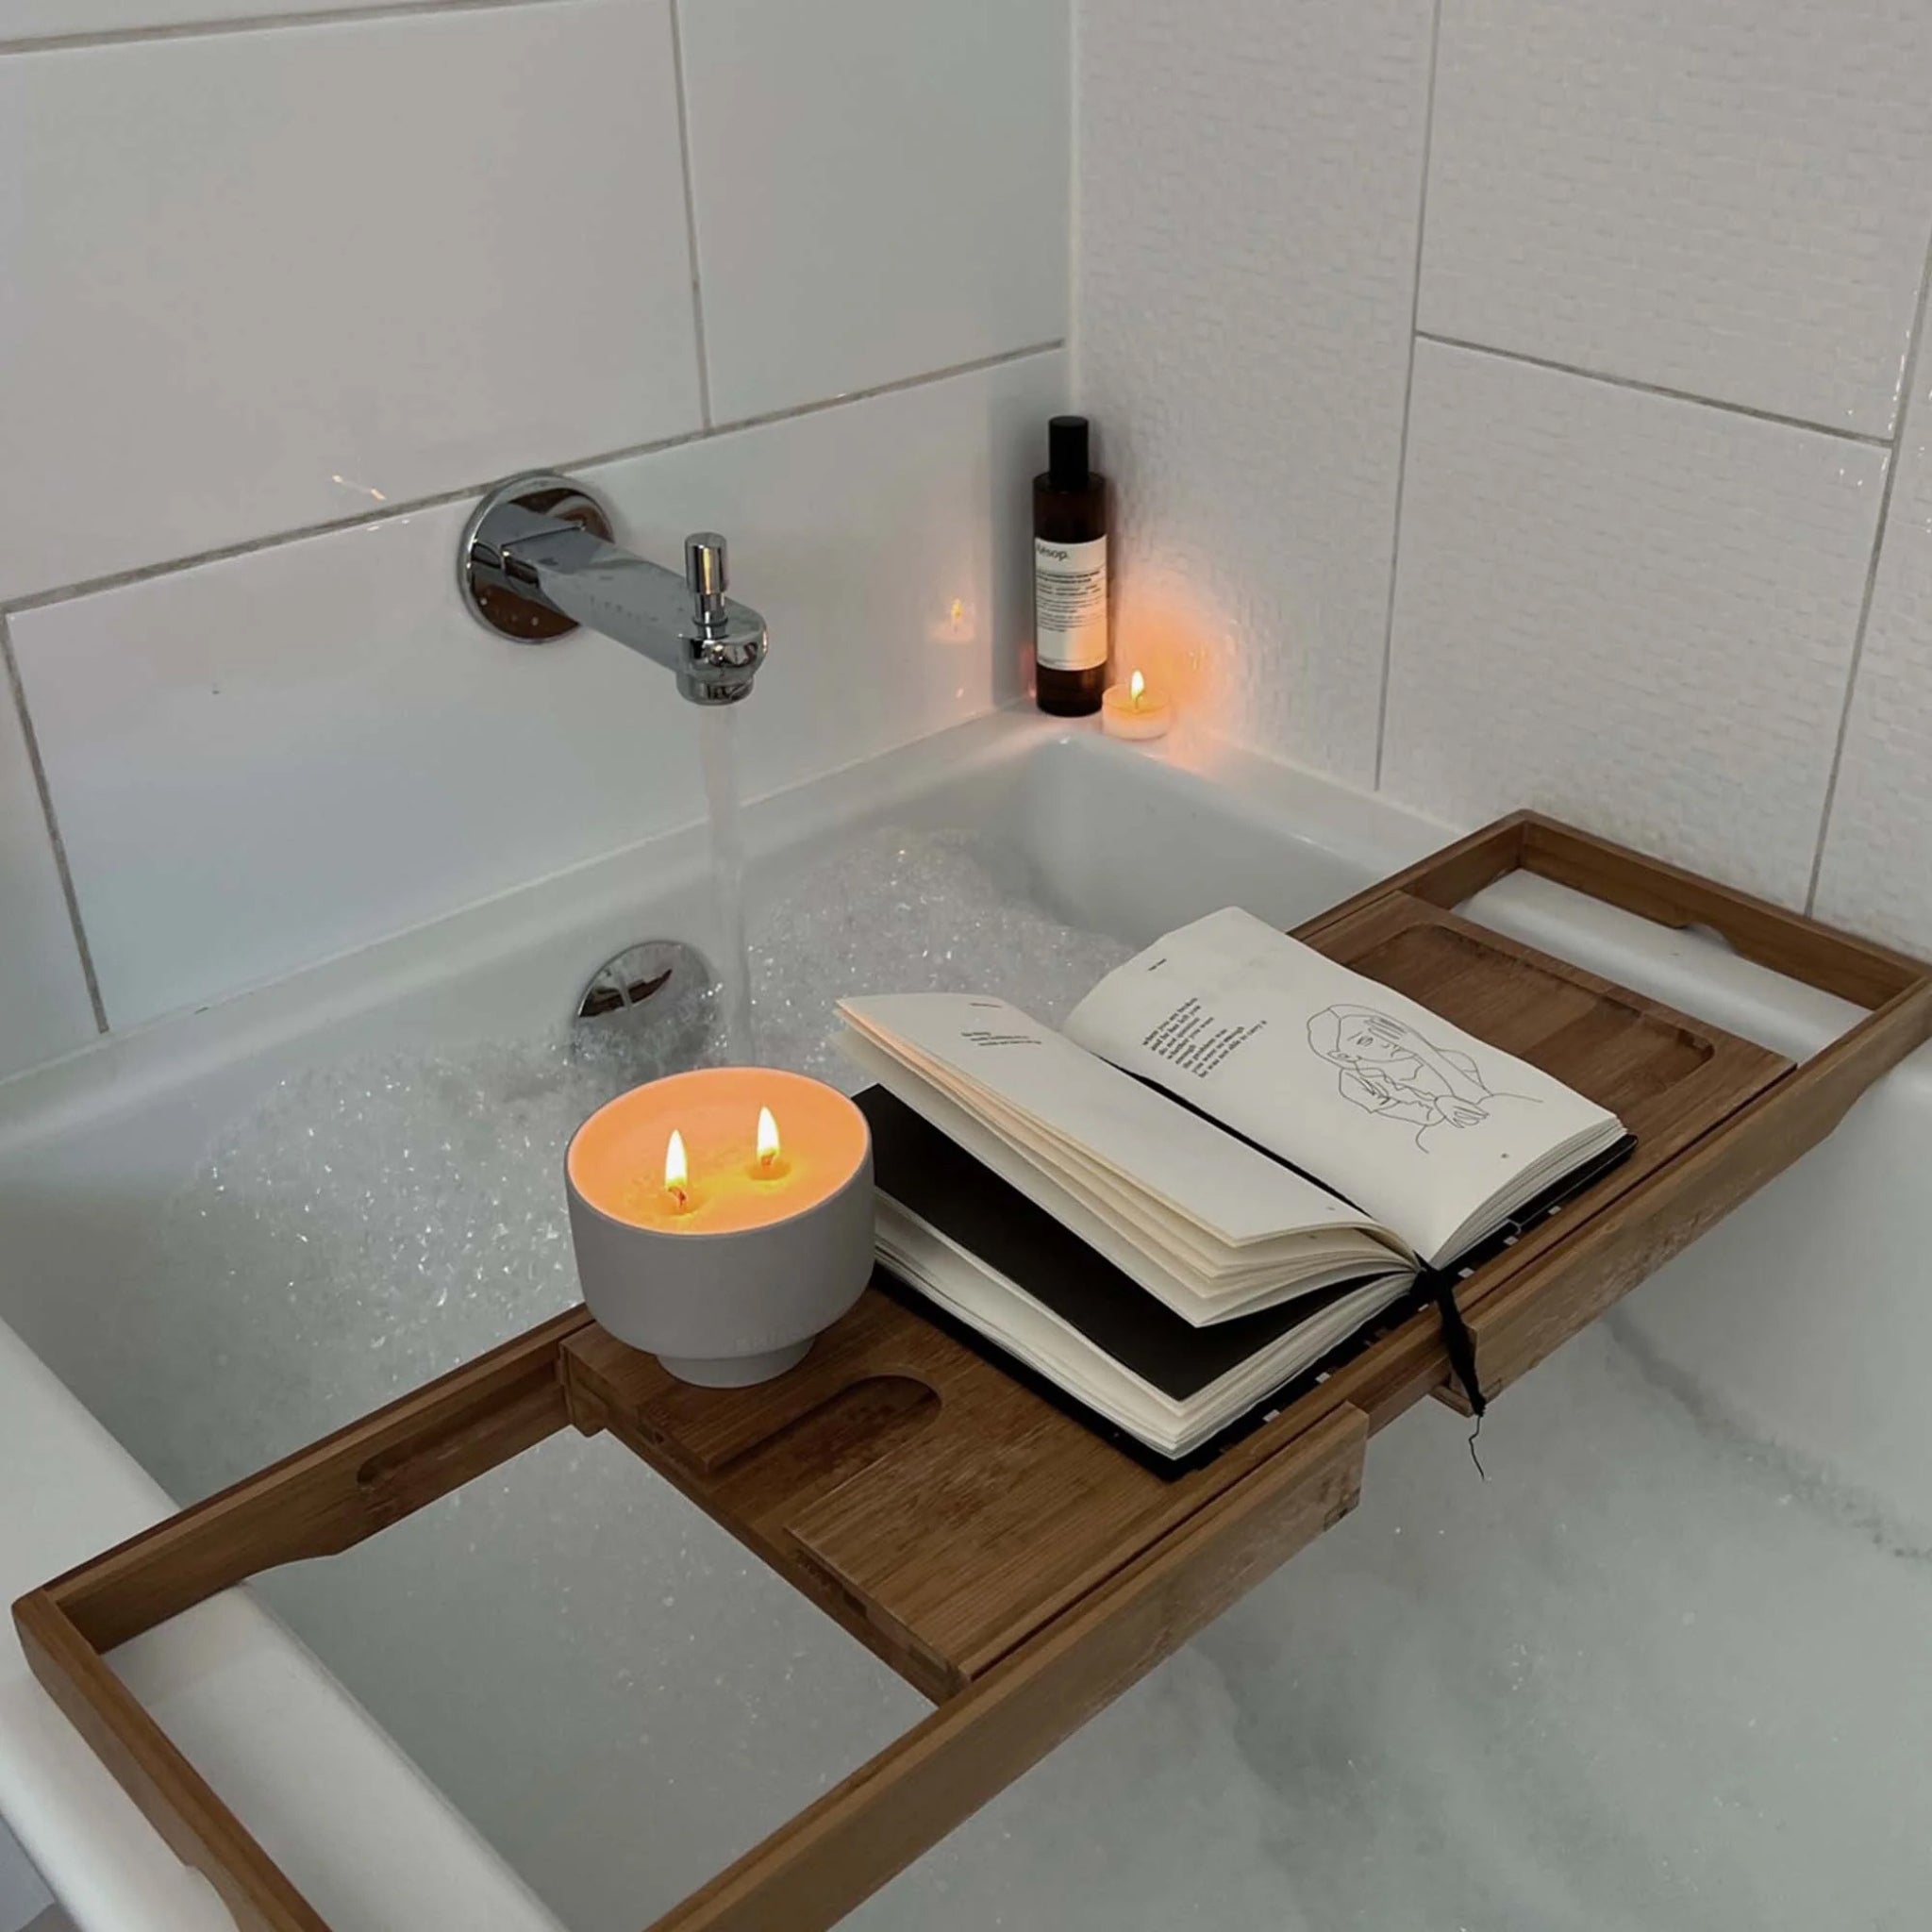 Verre Lune stone candle lit in a dimmed and relaxing bath setting 